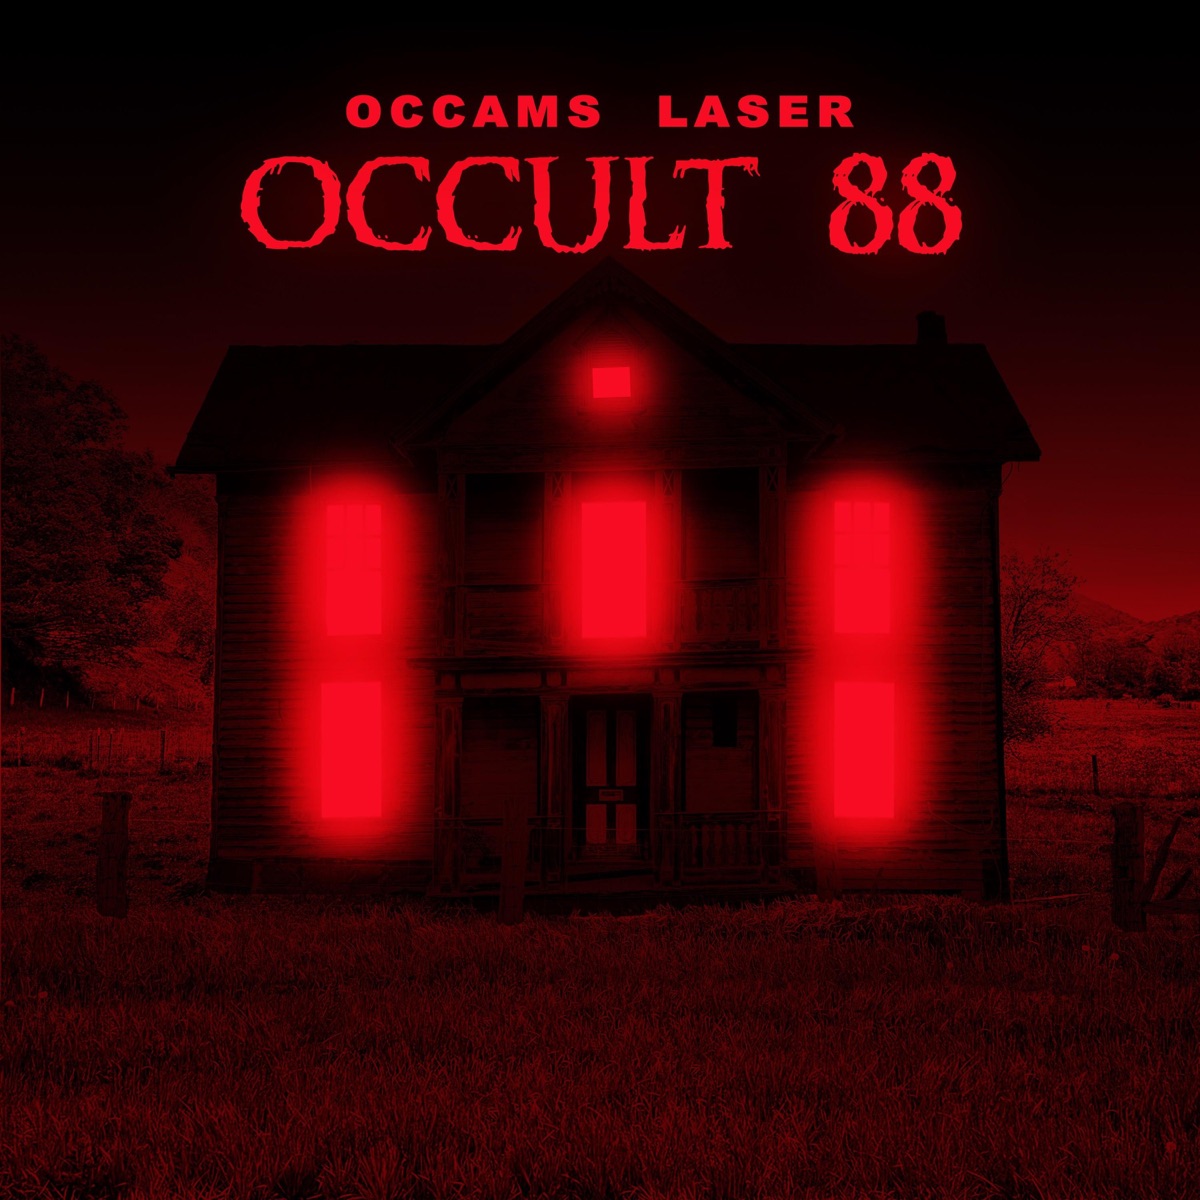 Occult 88 by Occams Laser on Apple Music